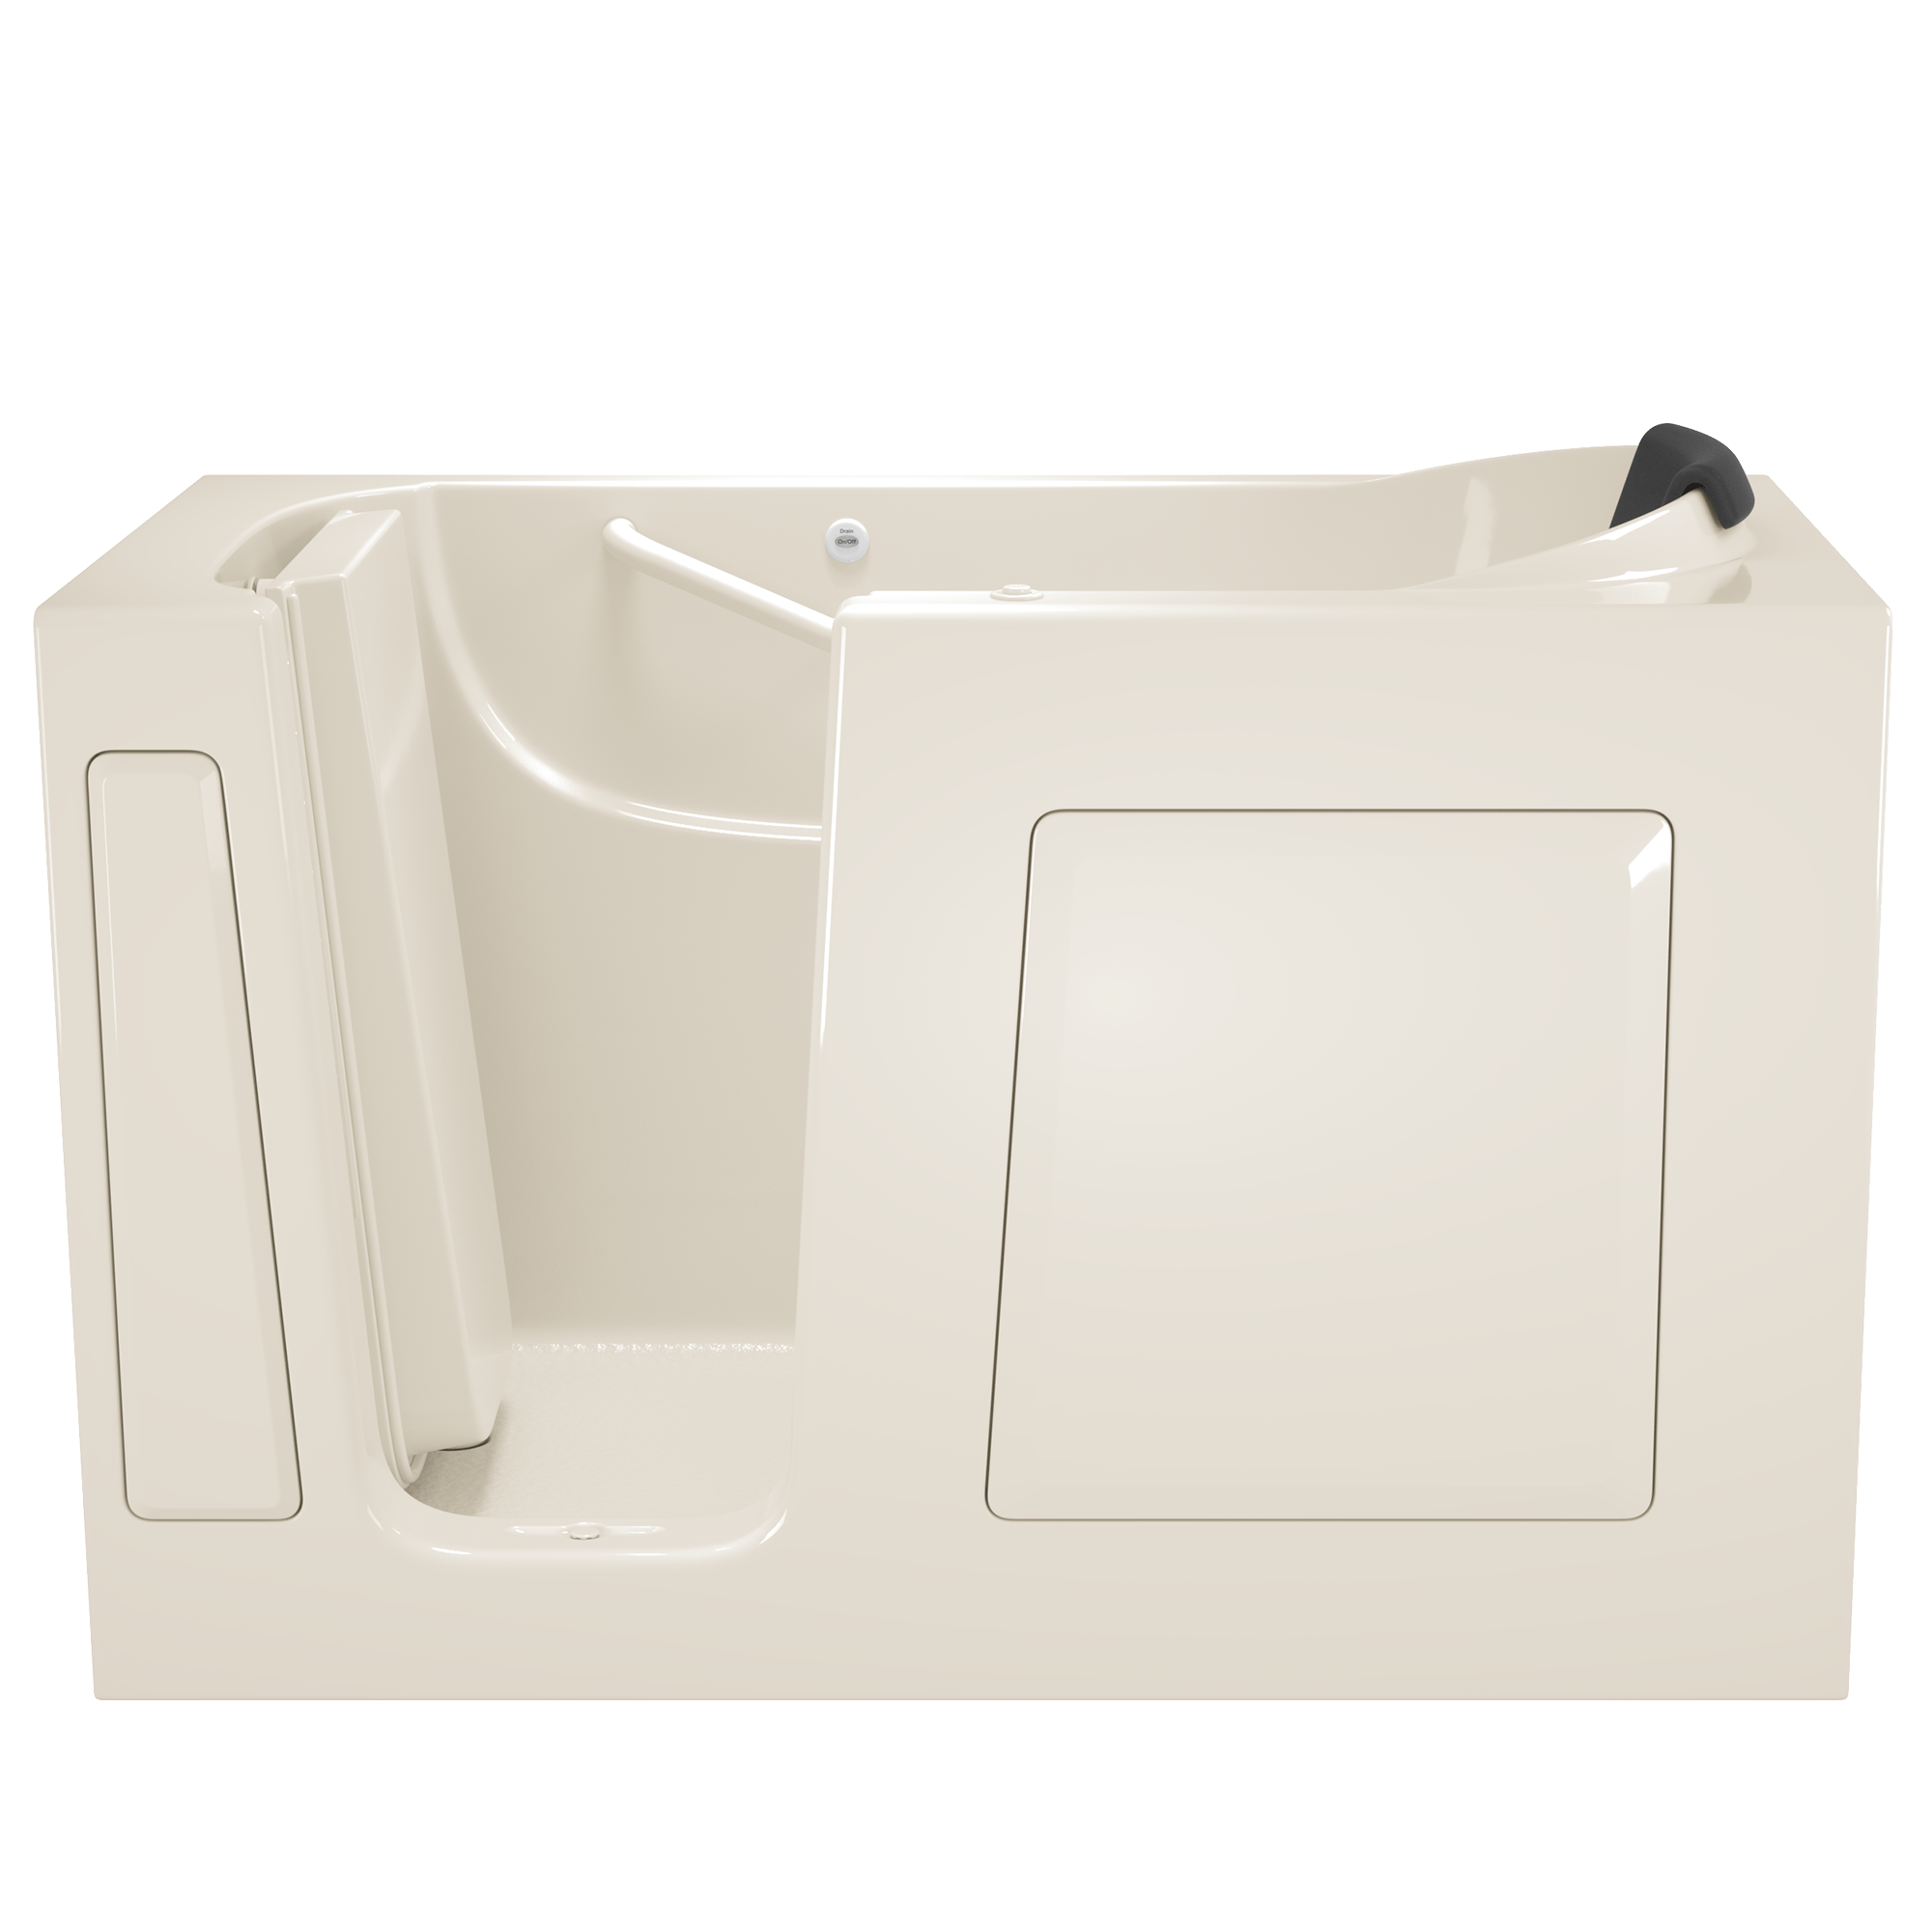 Gelcoat Premium Series 30 x 60  Inch Walk in Tub With Air Spa System   Left Hand Drain WIB LINEN